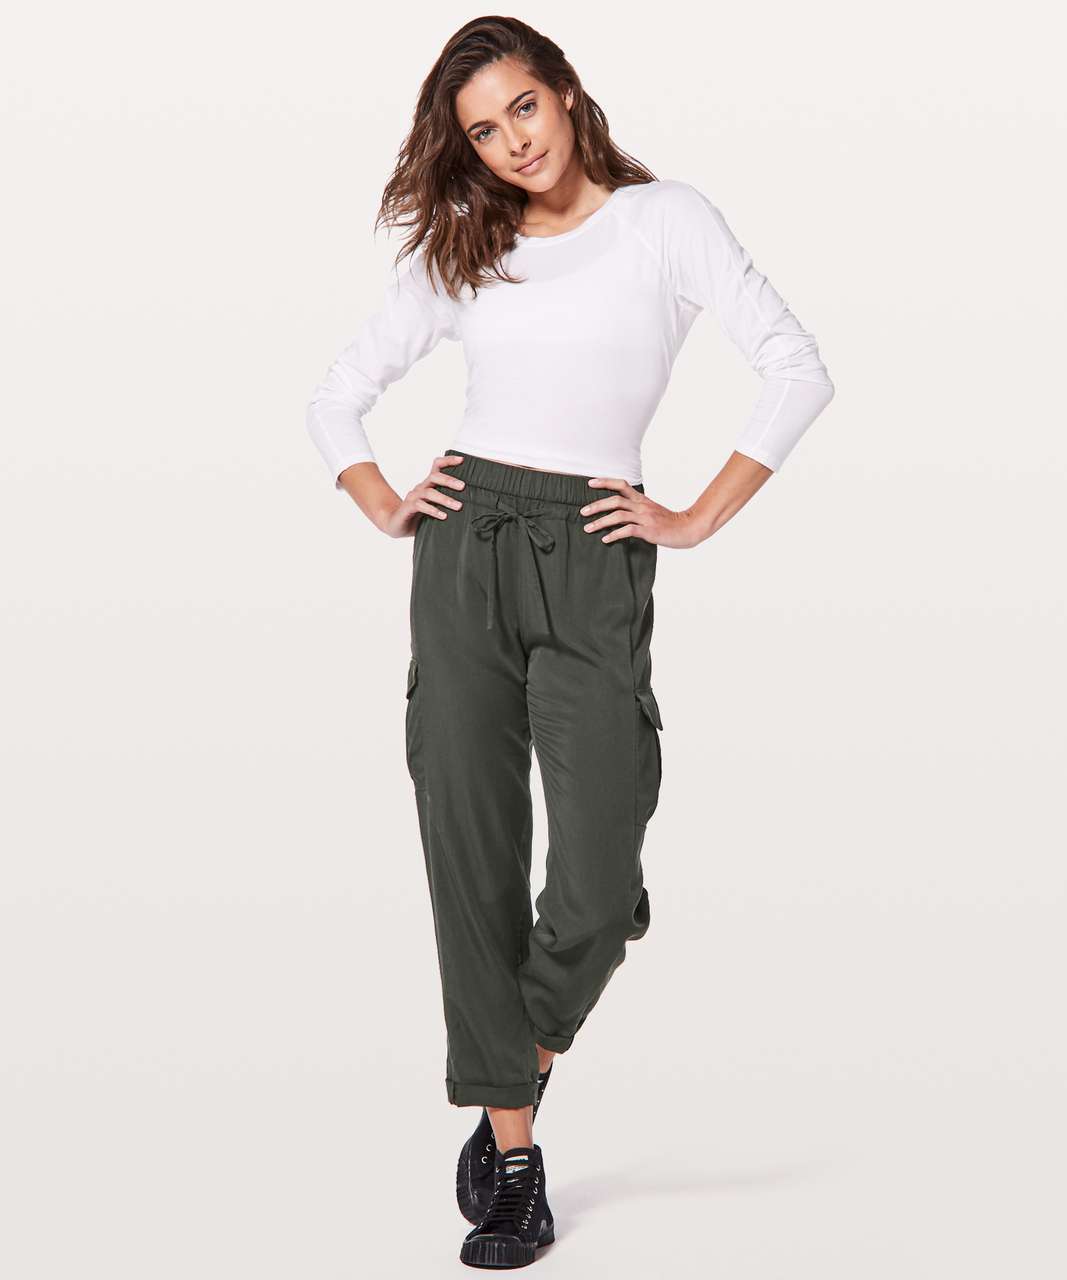 Chlorophylle Move-On Pants - Womens, FREE SHIPPING in Canada